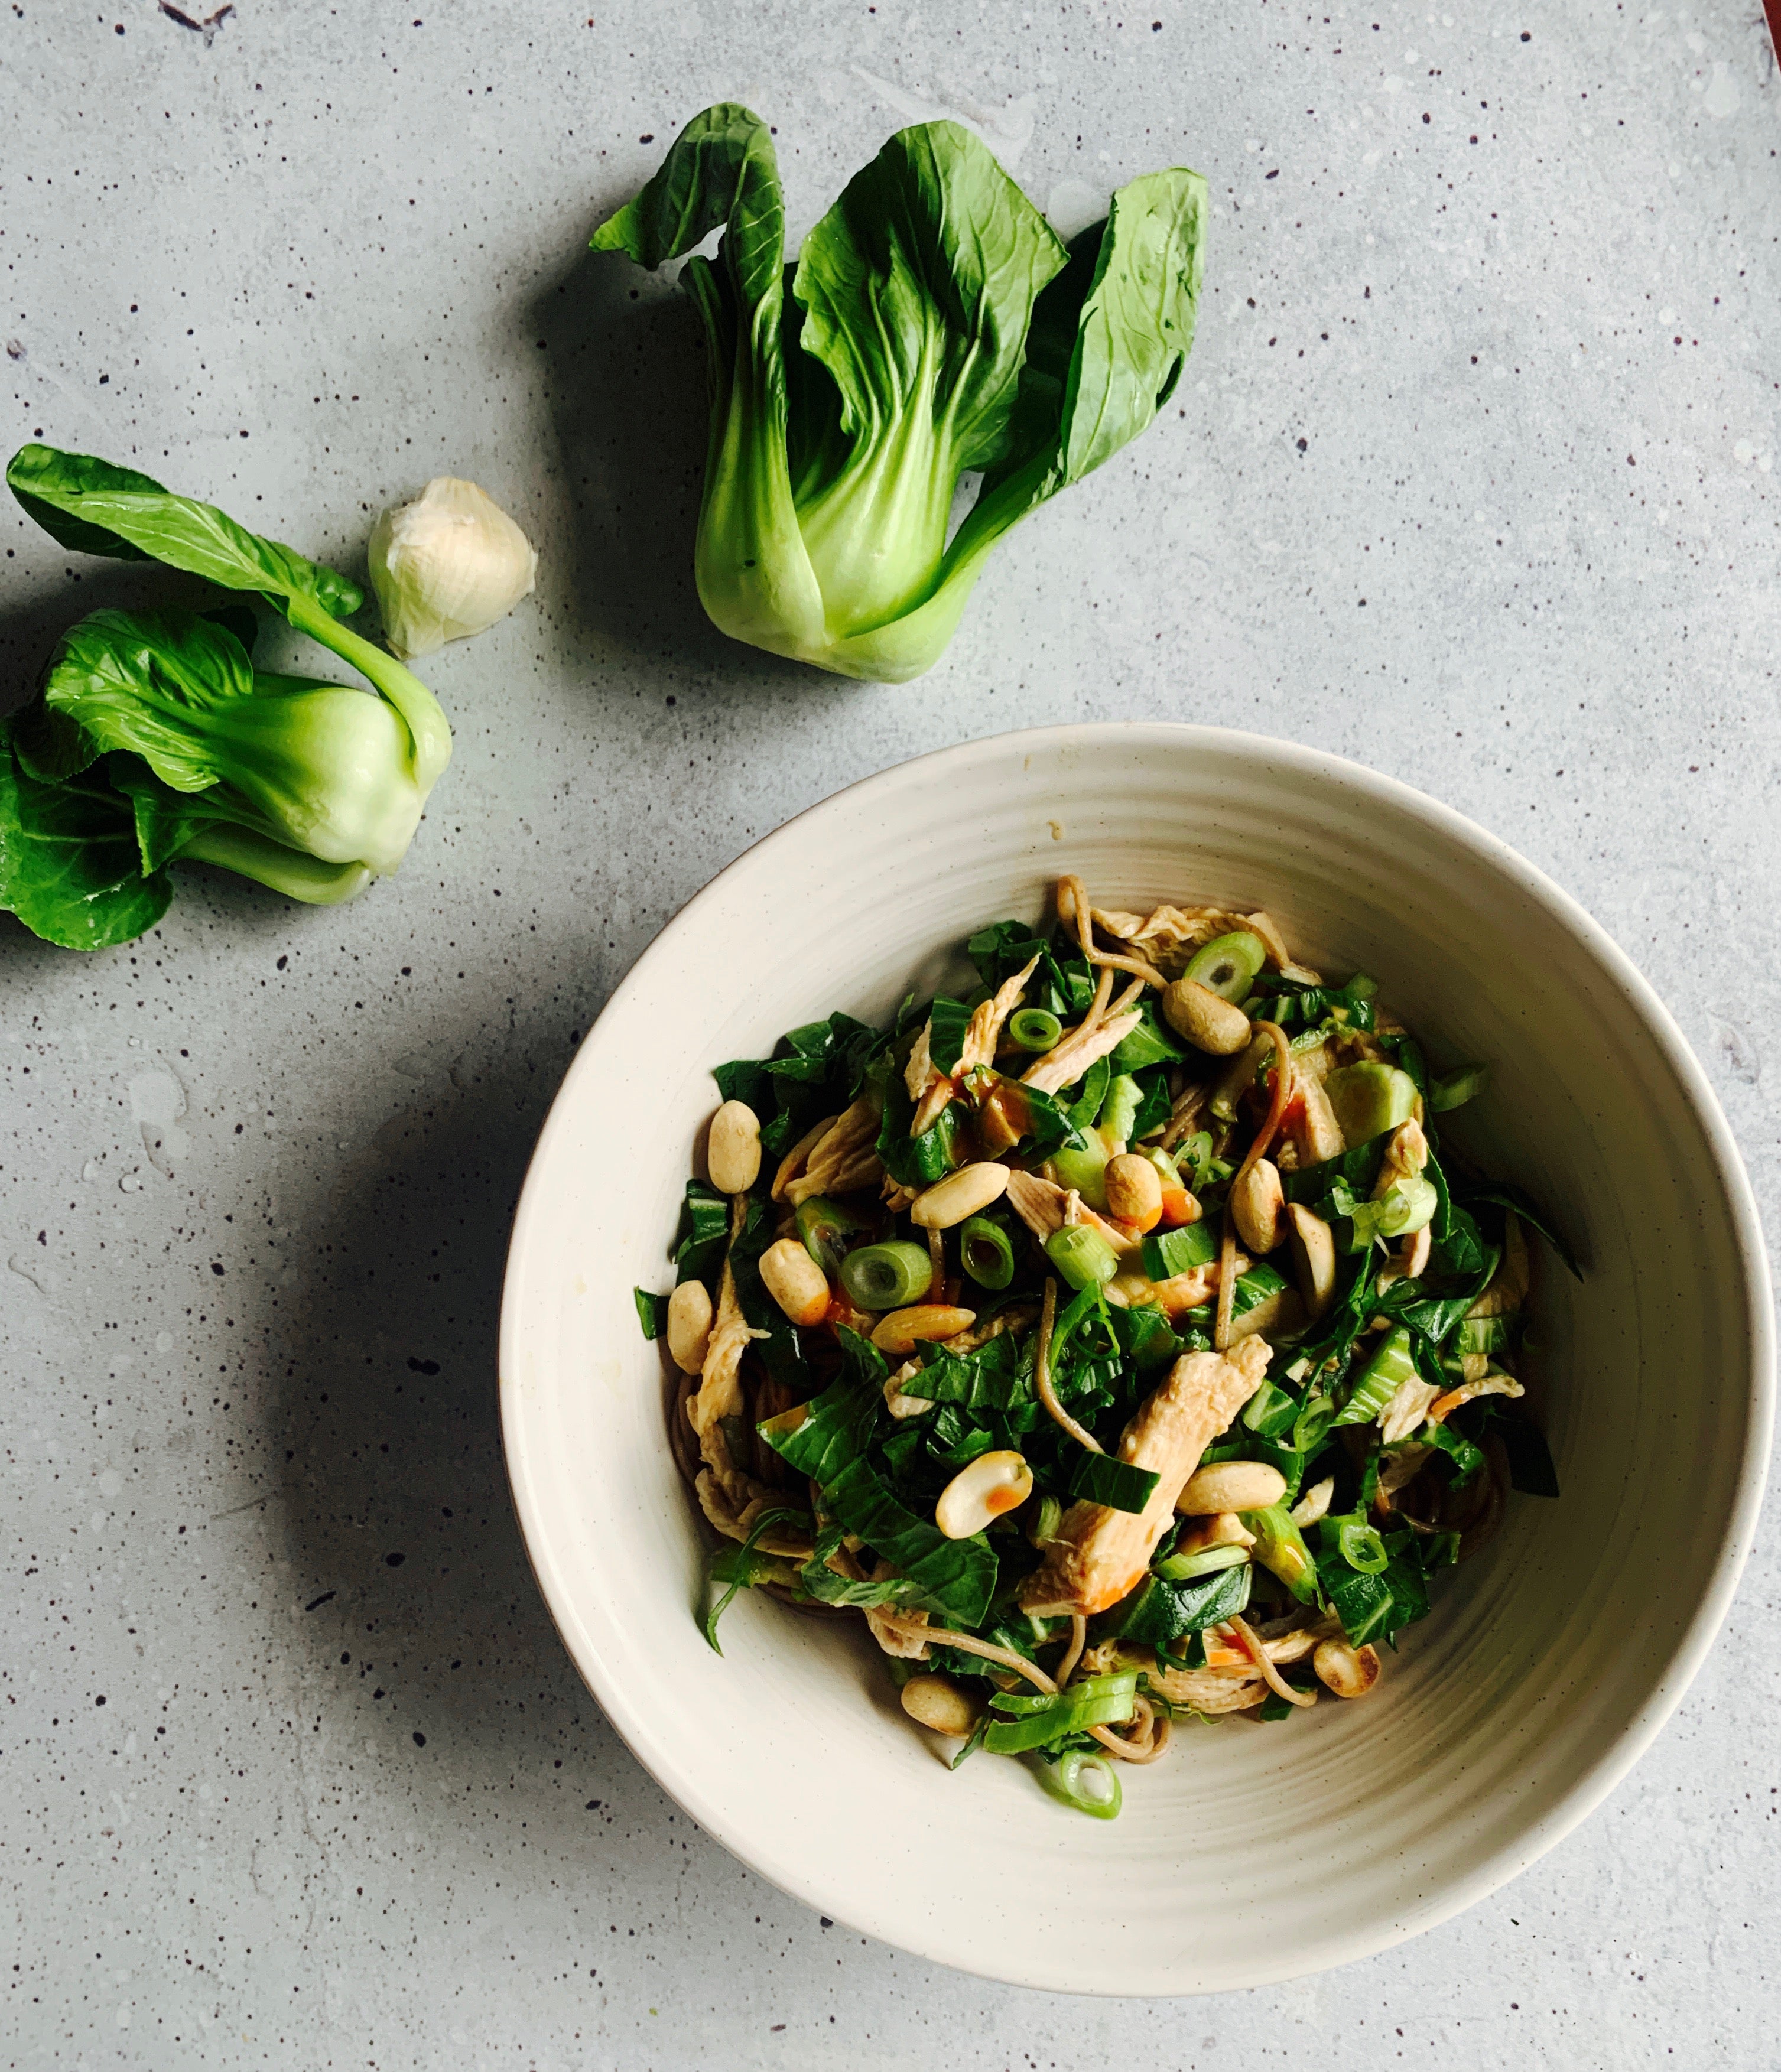 Cold Noodles with Bok Choy and Shredded Chicken